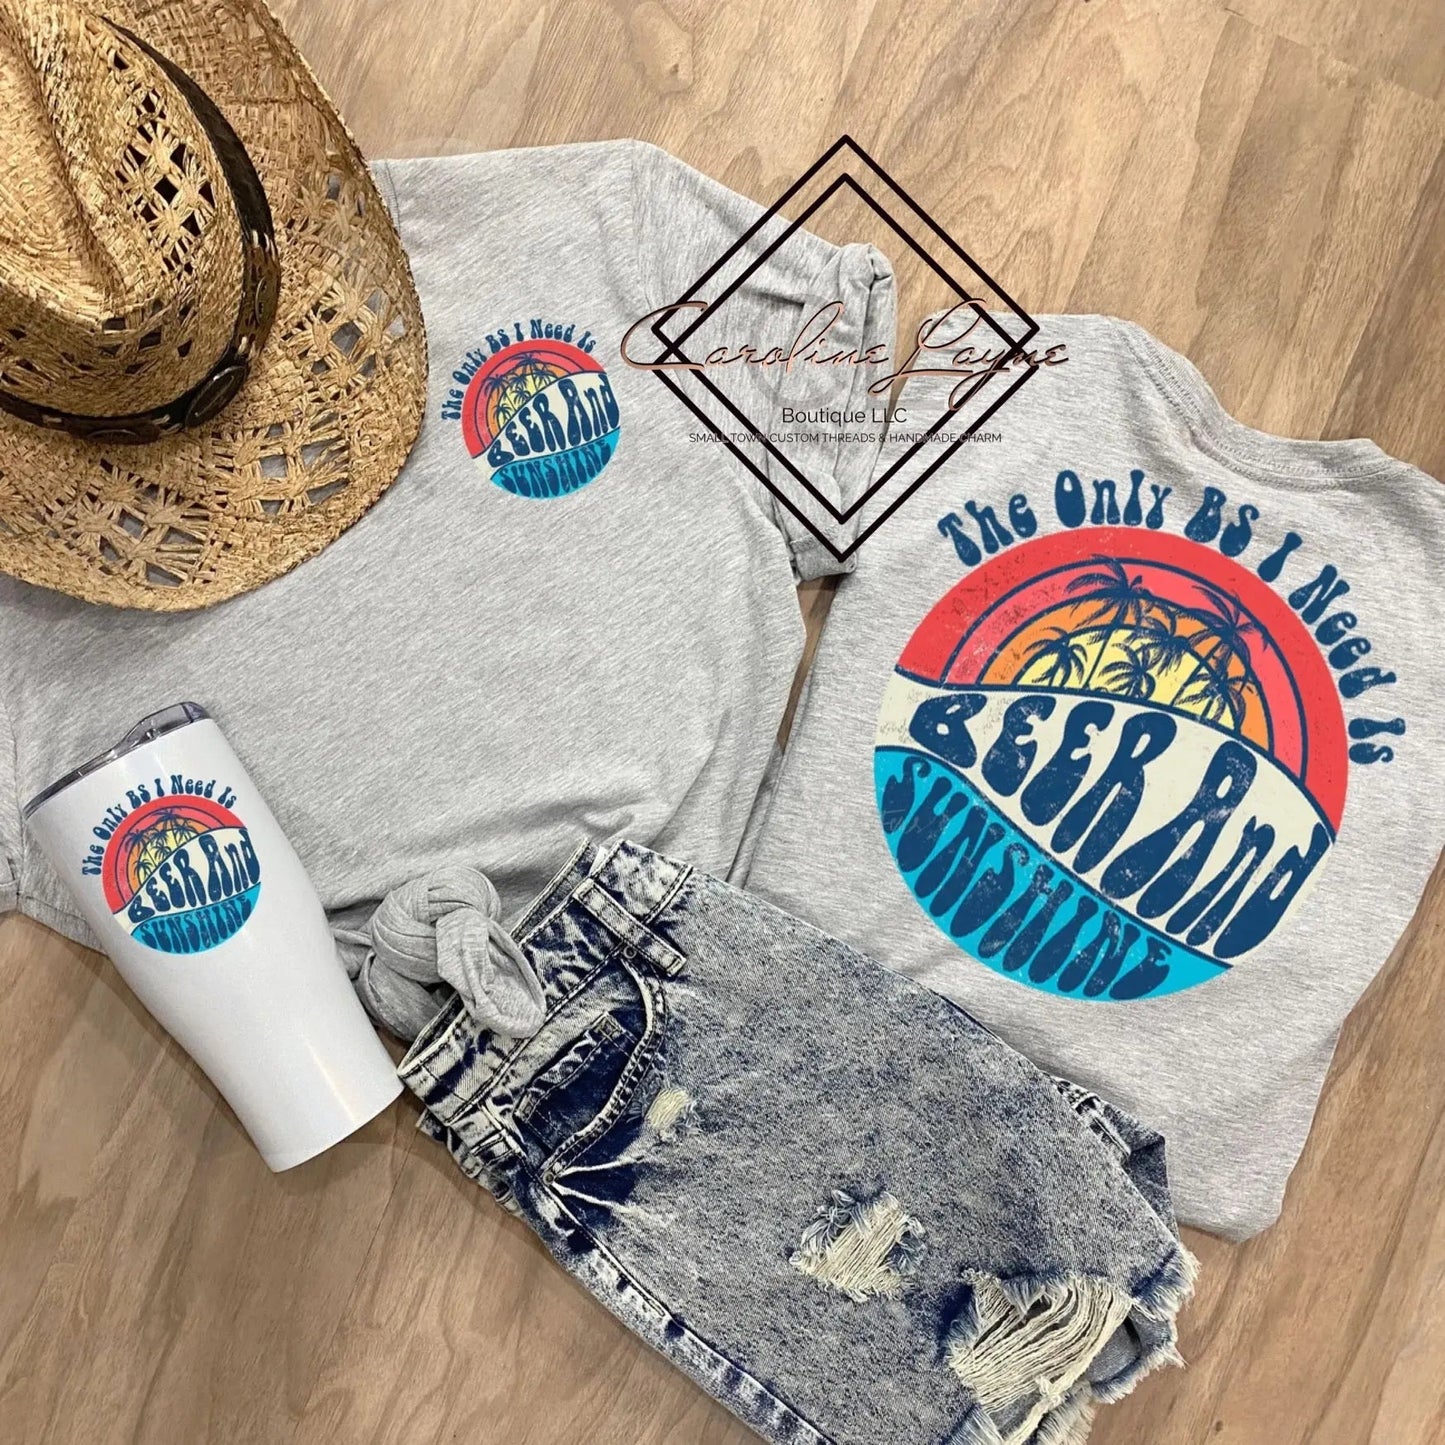 The Only BS I Need Is Beer And Sunshine Tee - Caroline Layne Boutique LLC